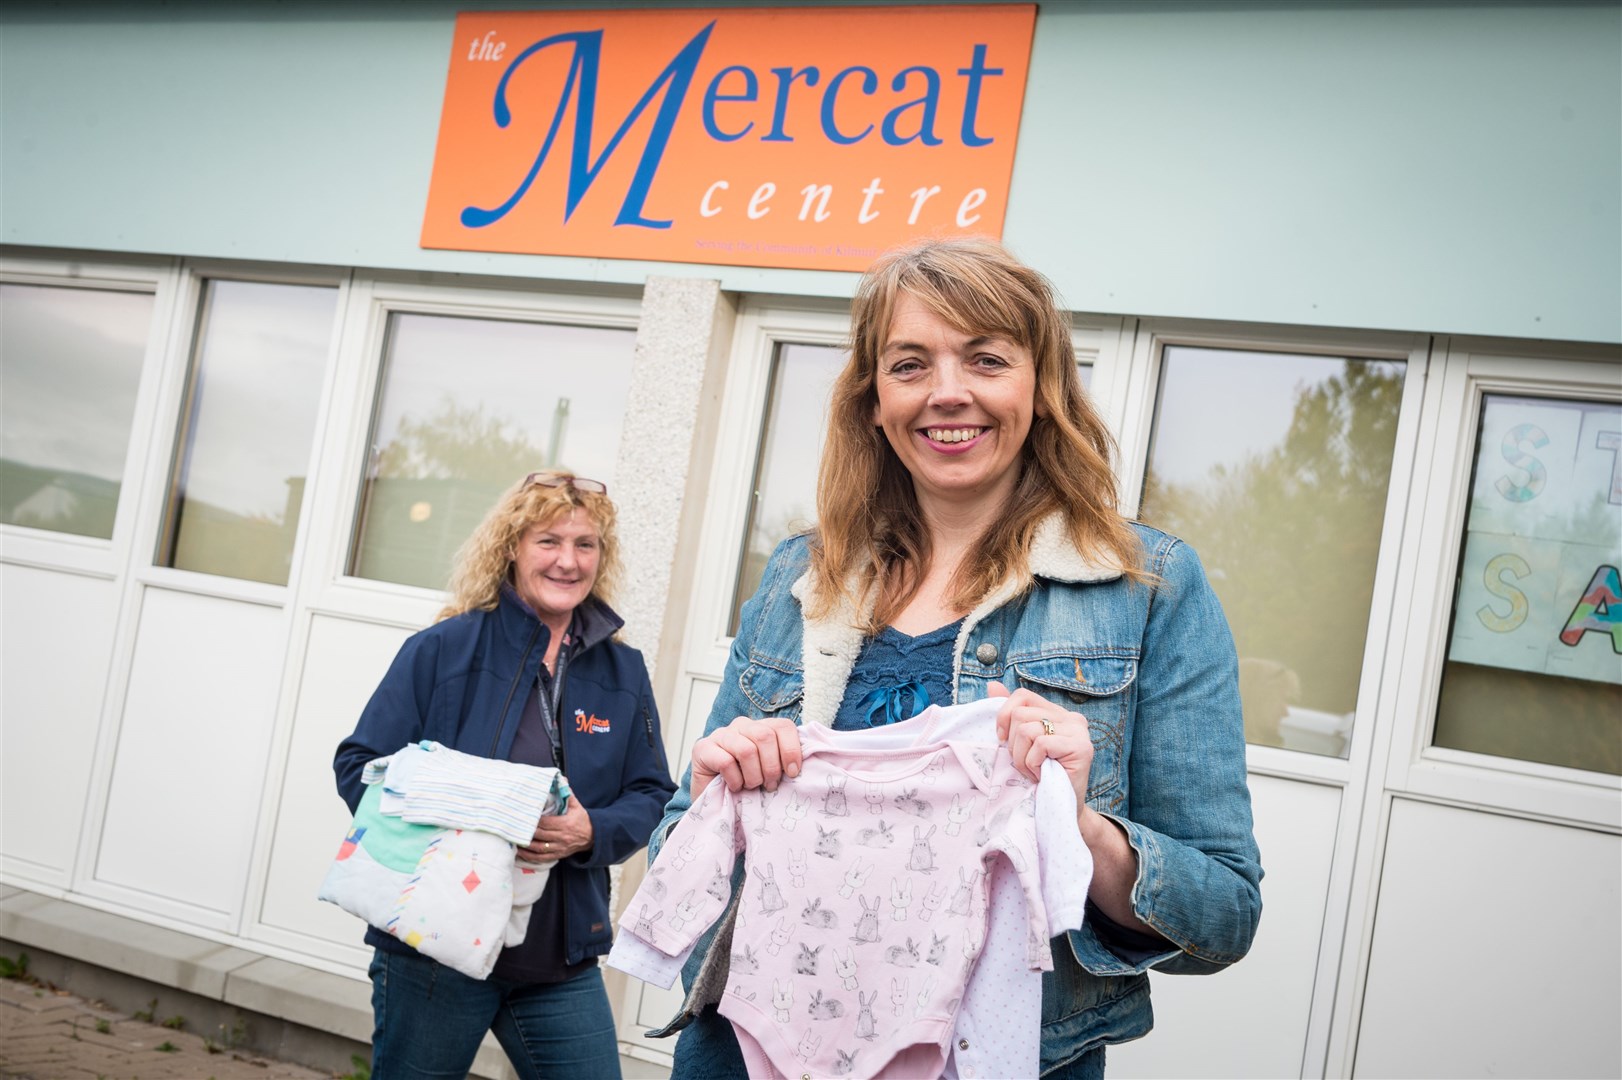 A decision by Dawn Aird, of Kildary, to organise a collection of baby clothes for a children's hospital in Yemen has borne fruit. She is pictured here with Mercat Centre manager Mairi Crow who helped her out. Picture: Callum Mackay